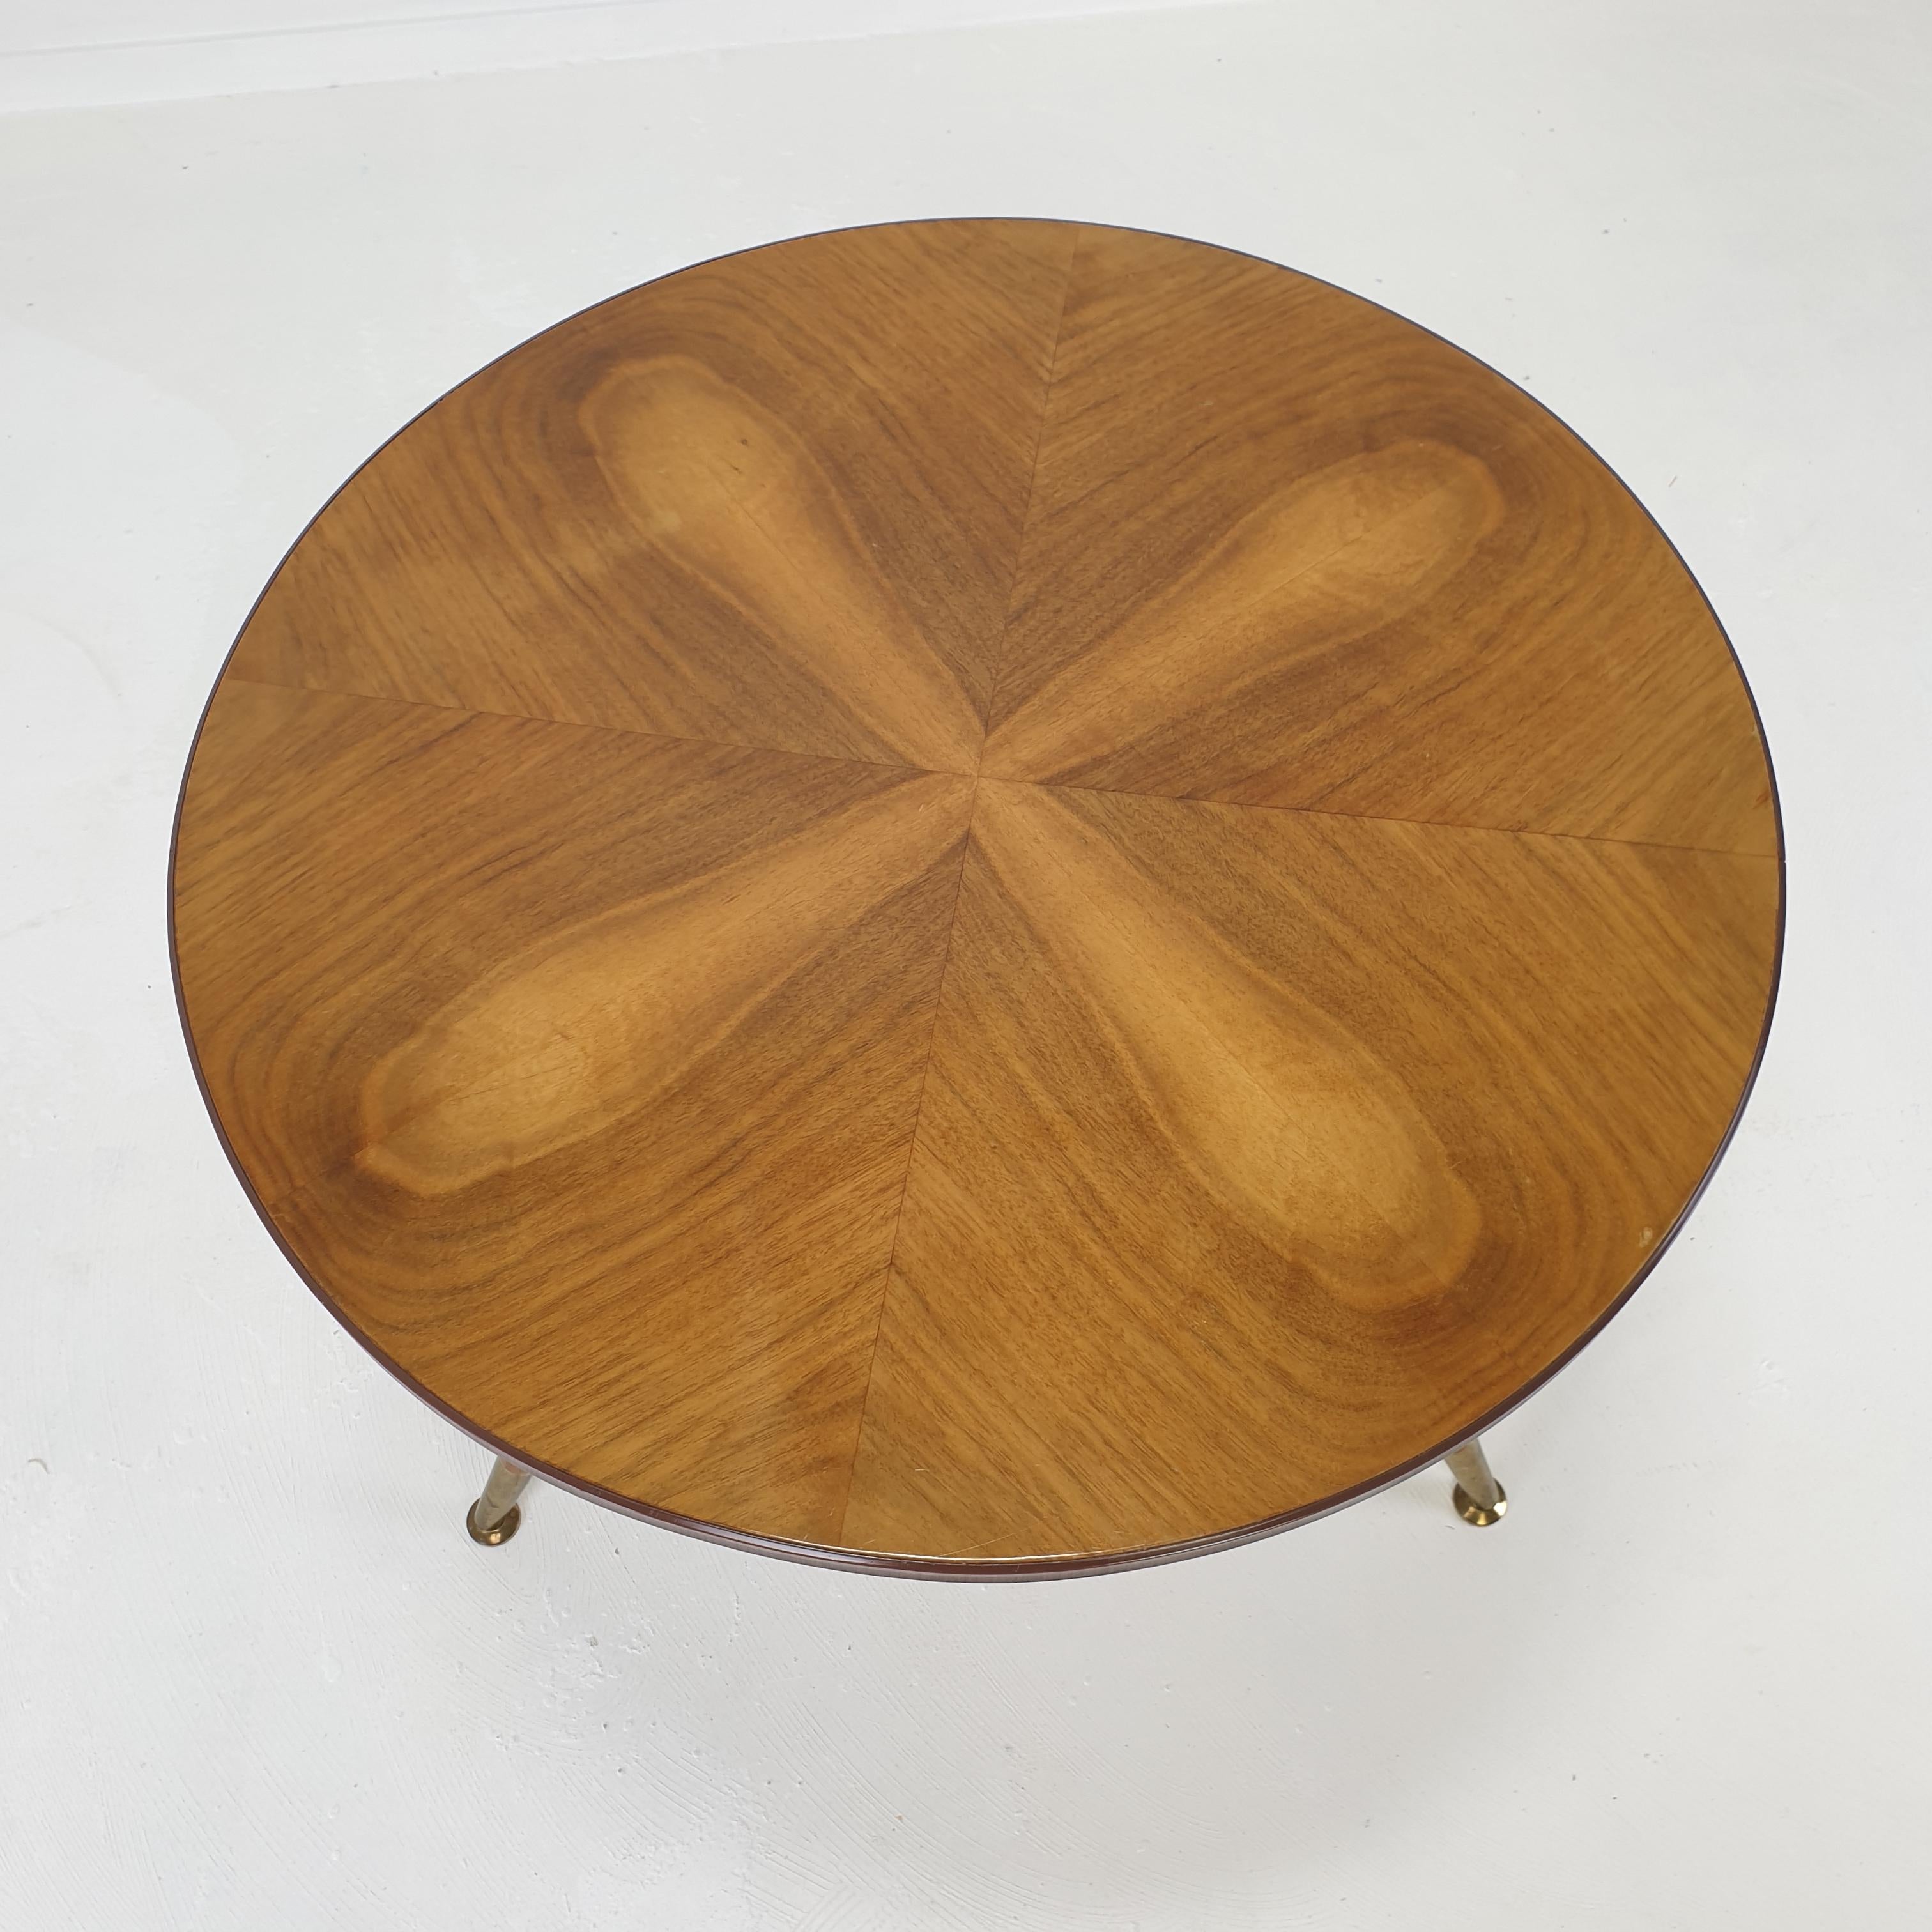 Midcentury Italian Wooden Coffee or Side Table with Brass Feet, 1960s For Sale 9